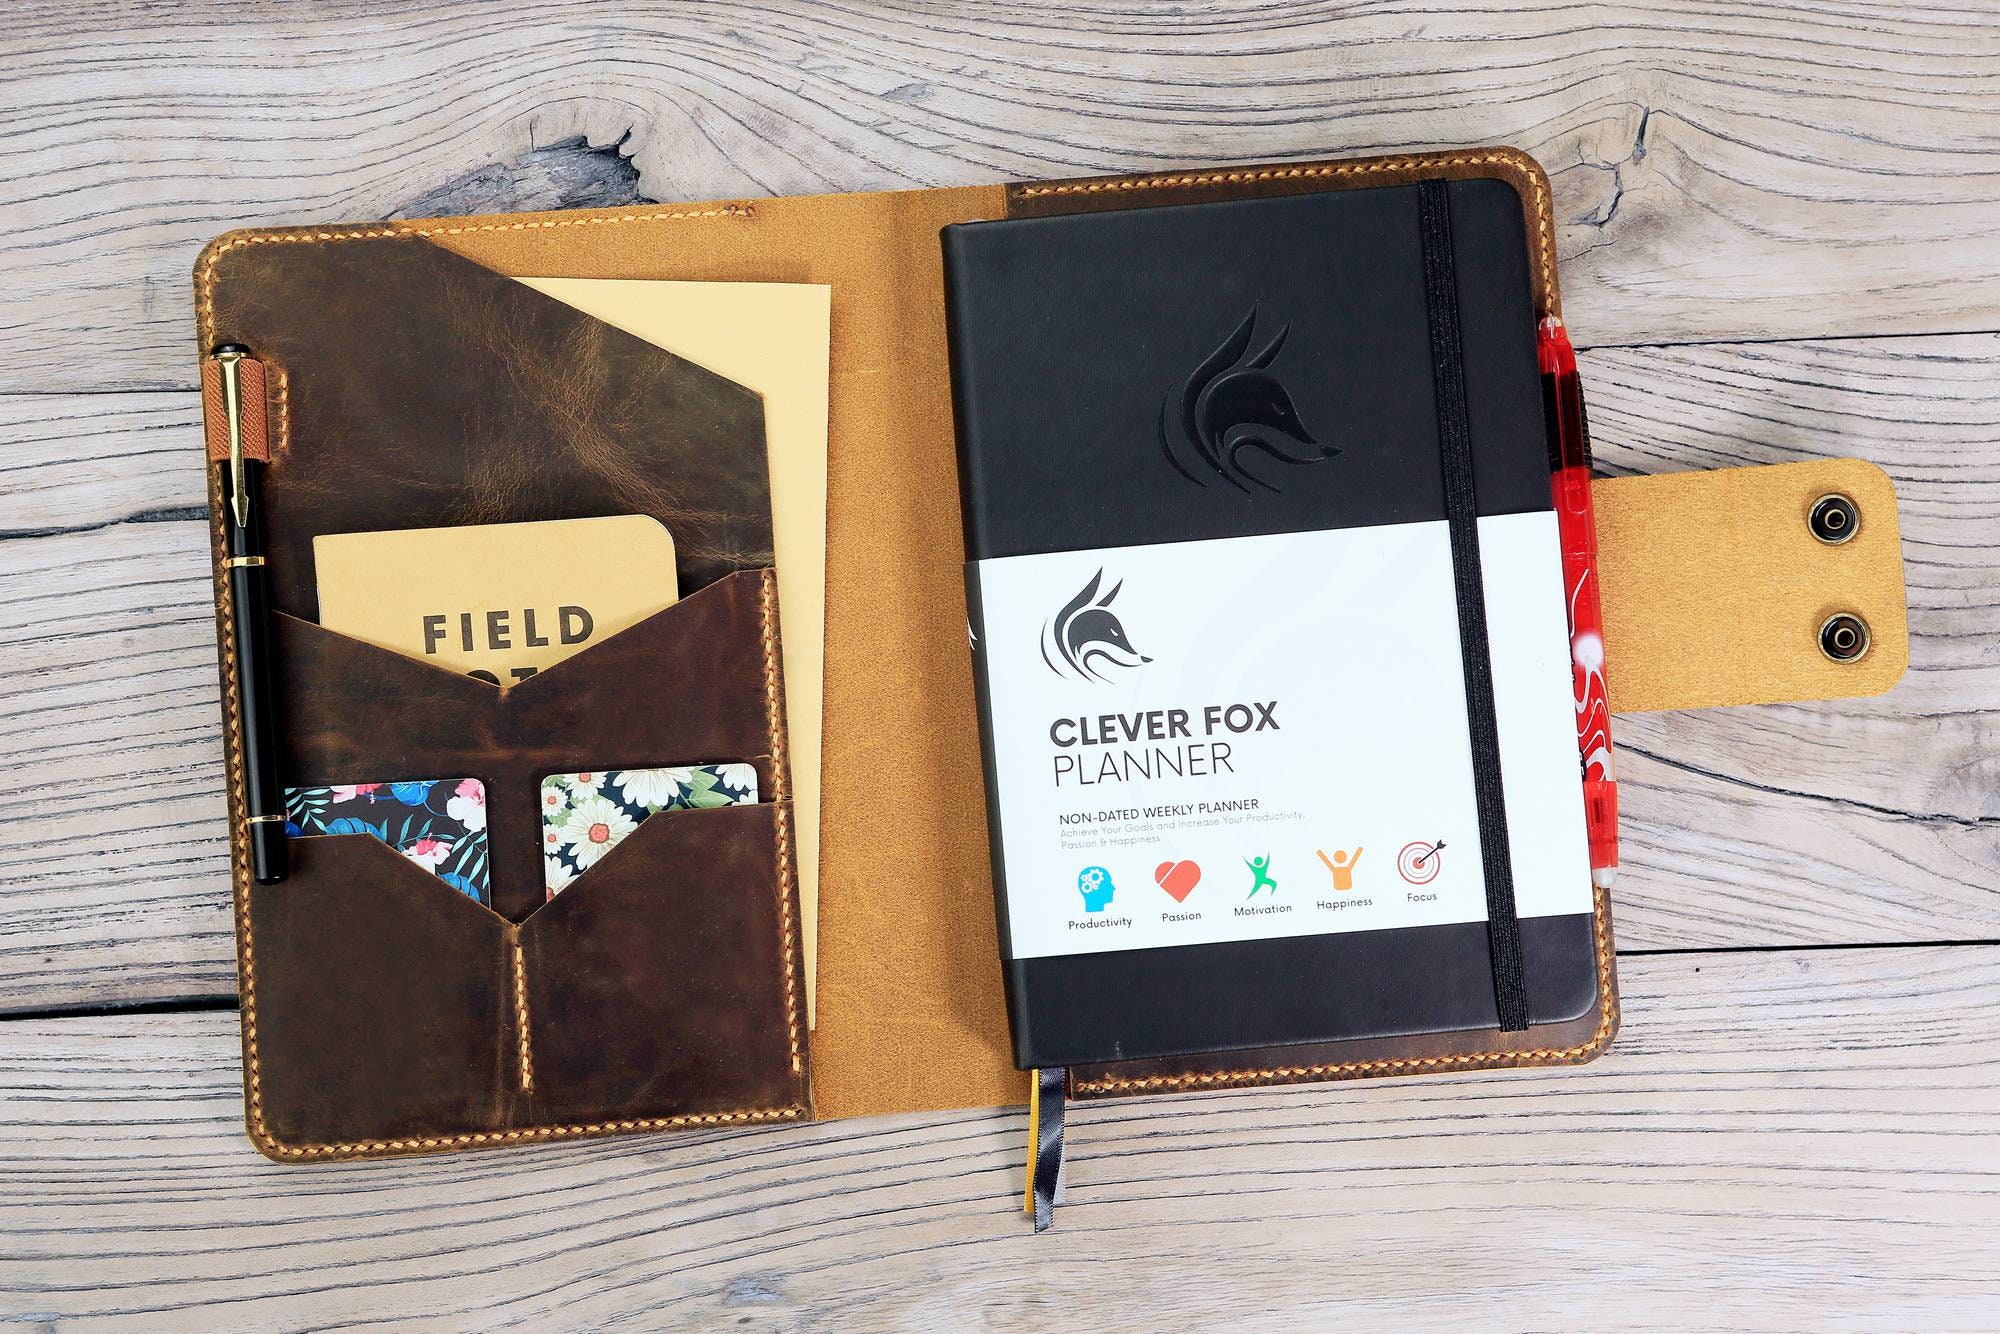 Review: Clever Fox Planner